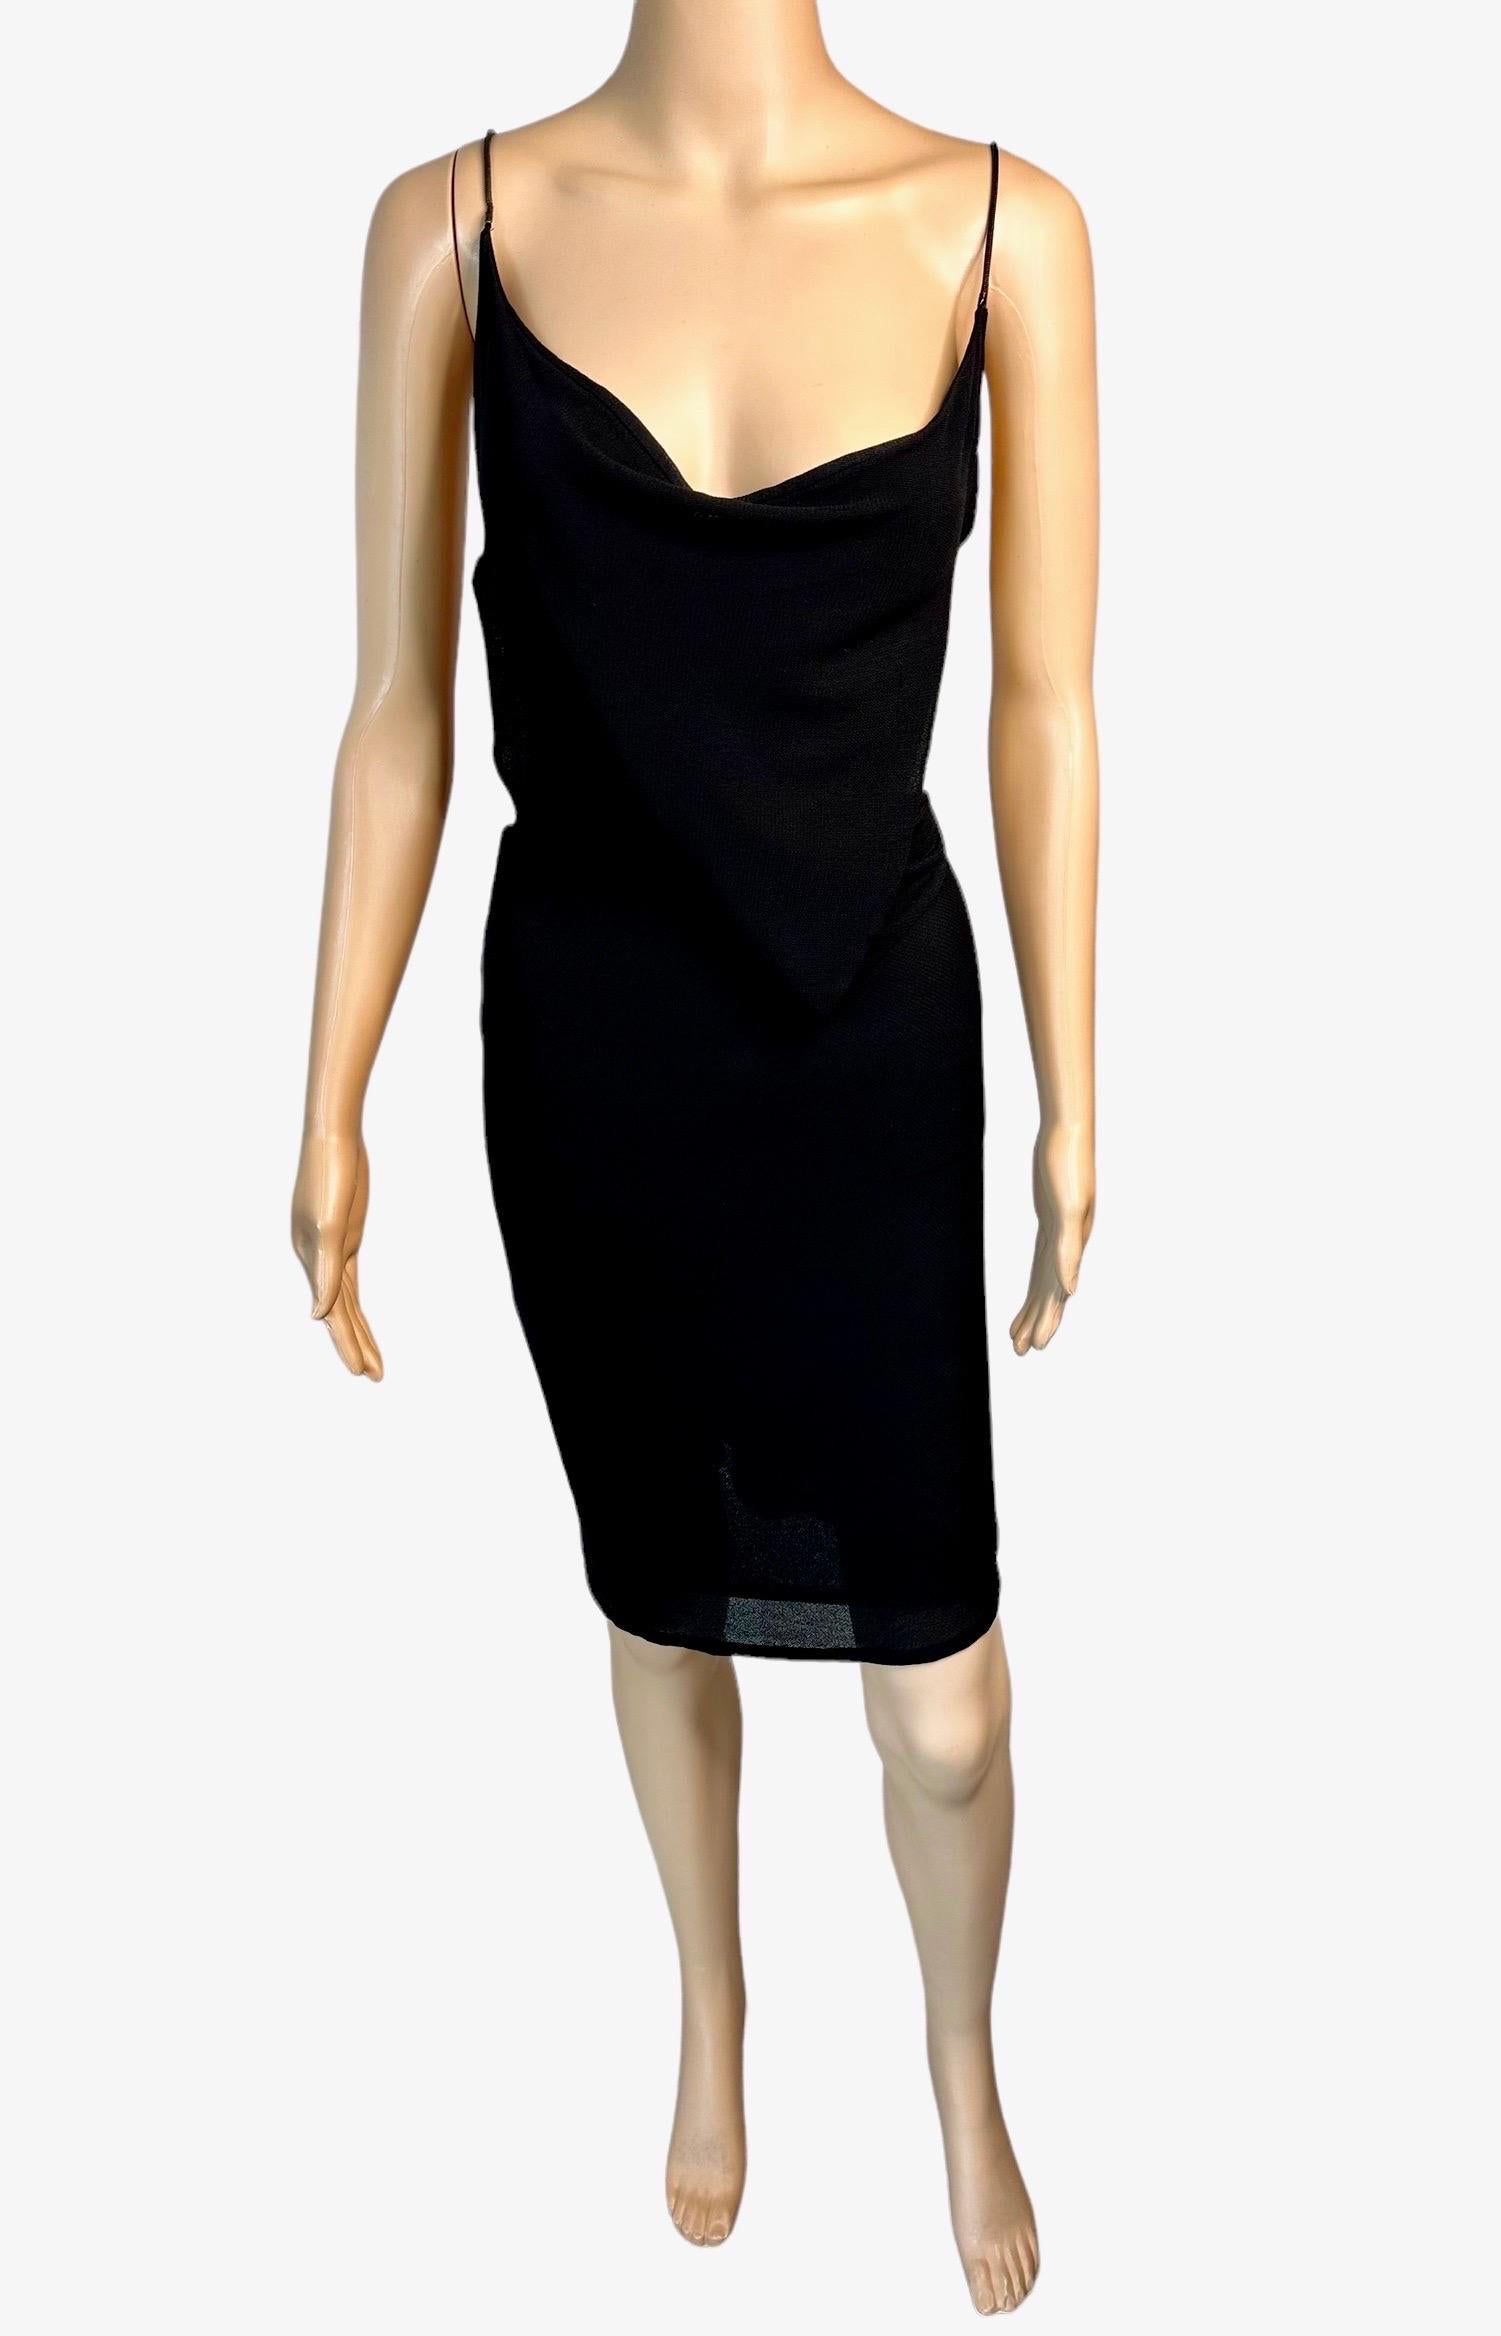 Tom Ford for Gucci S/S 1997 Runway Chain Cutout Backless Sheer Knit Black Dress For Sale 6